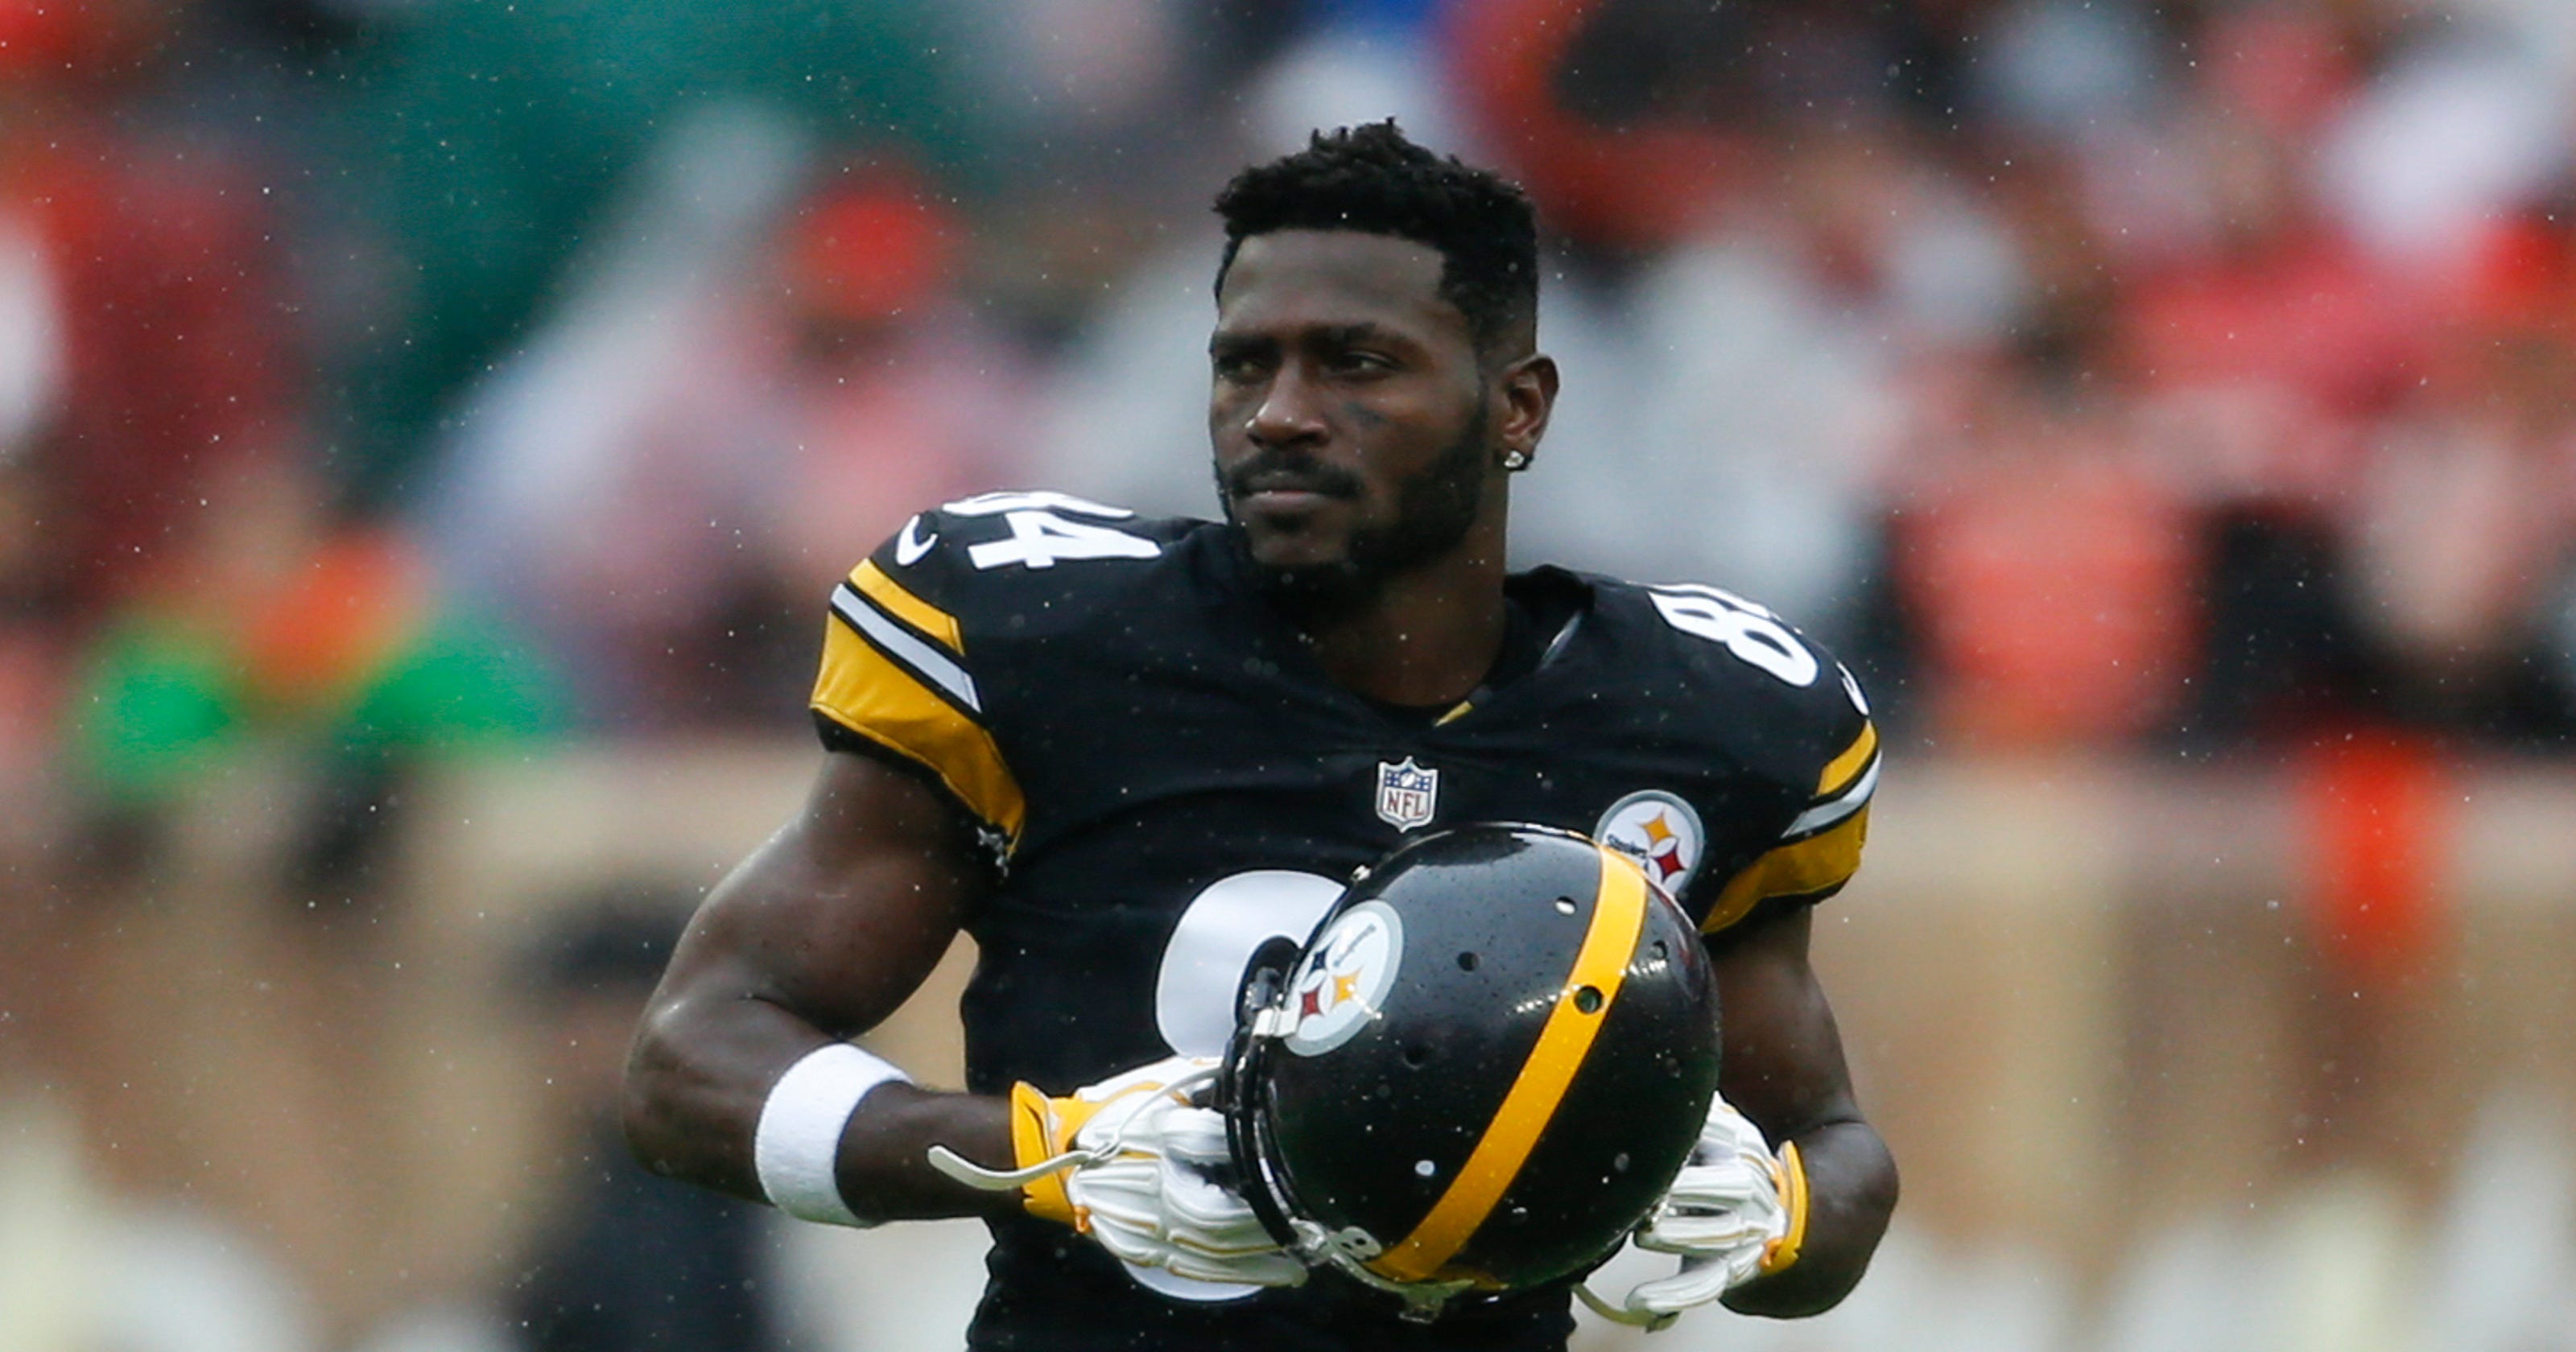 Antonio Brown: Absence from Steelers' practice may be unexcused3200 x 1680